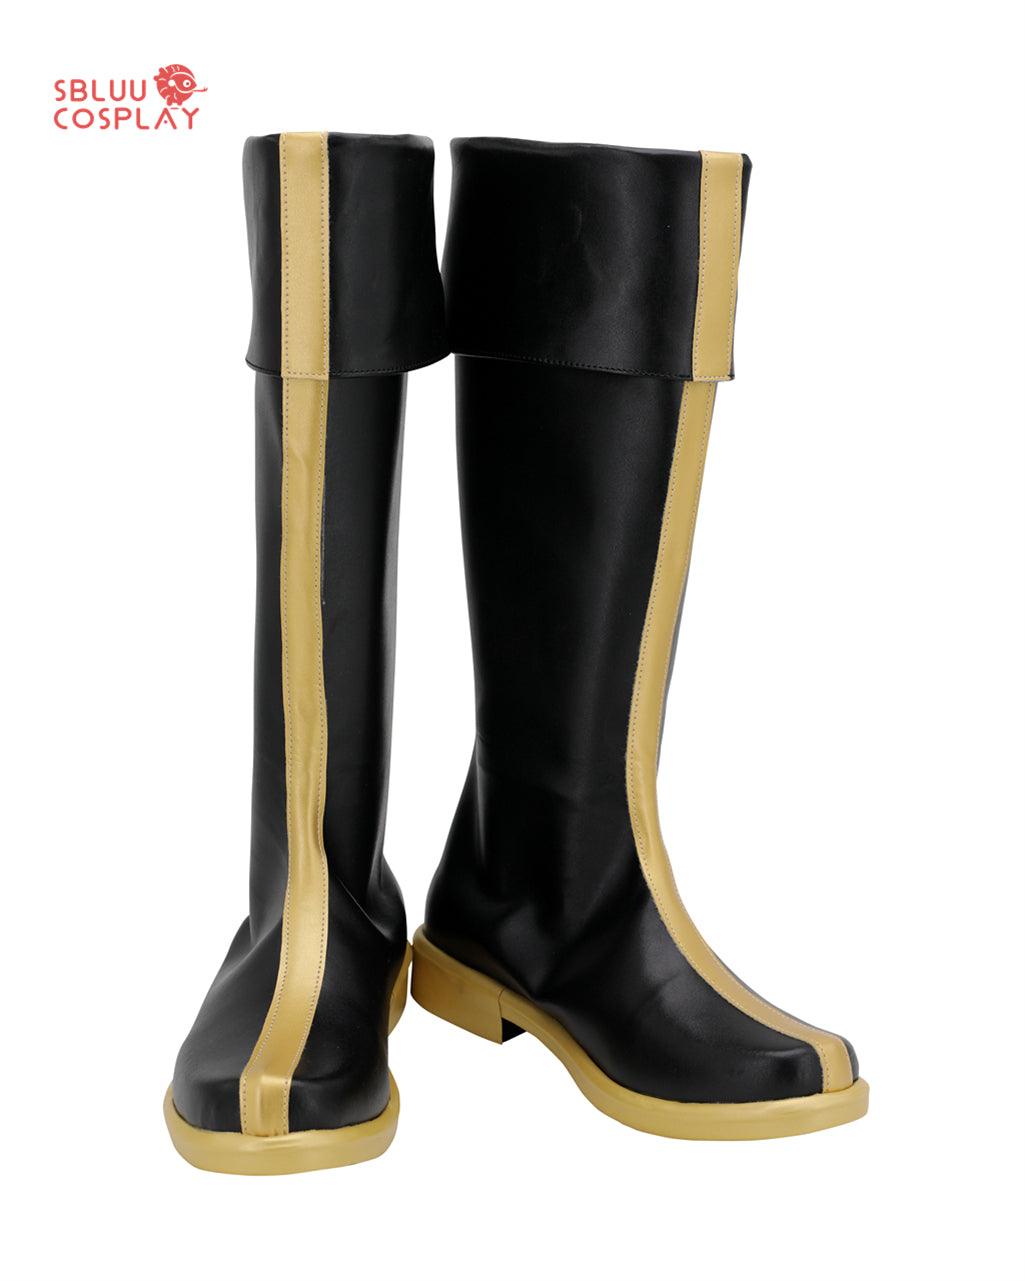 Fire Emblem ThreeHouses Ashe Duran Cosplay Shoes Custom Made Boots - SBluuCosplay